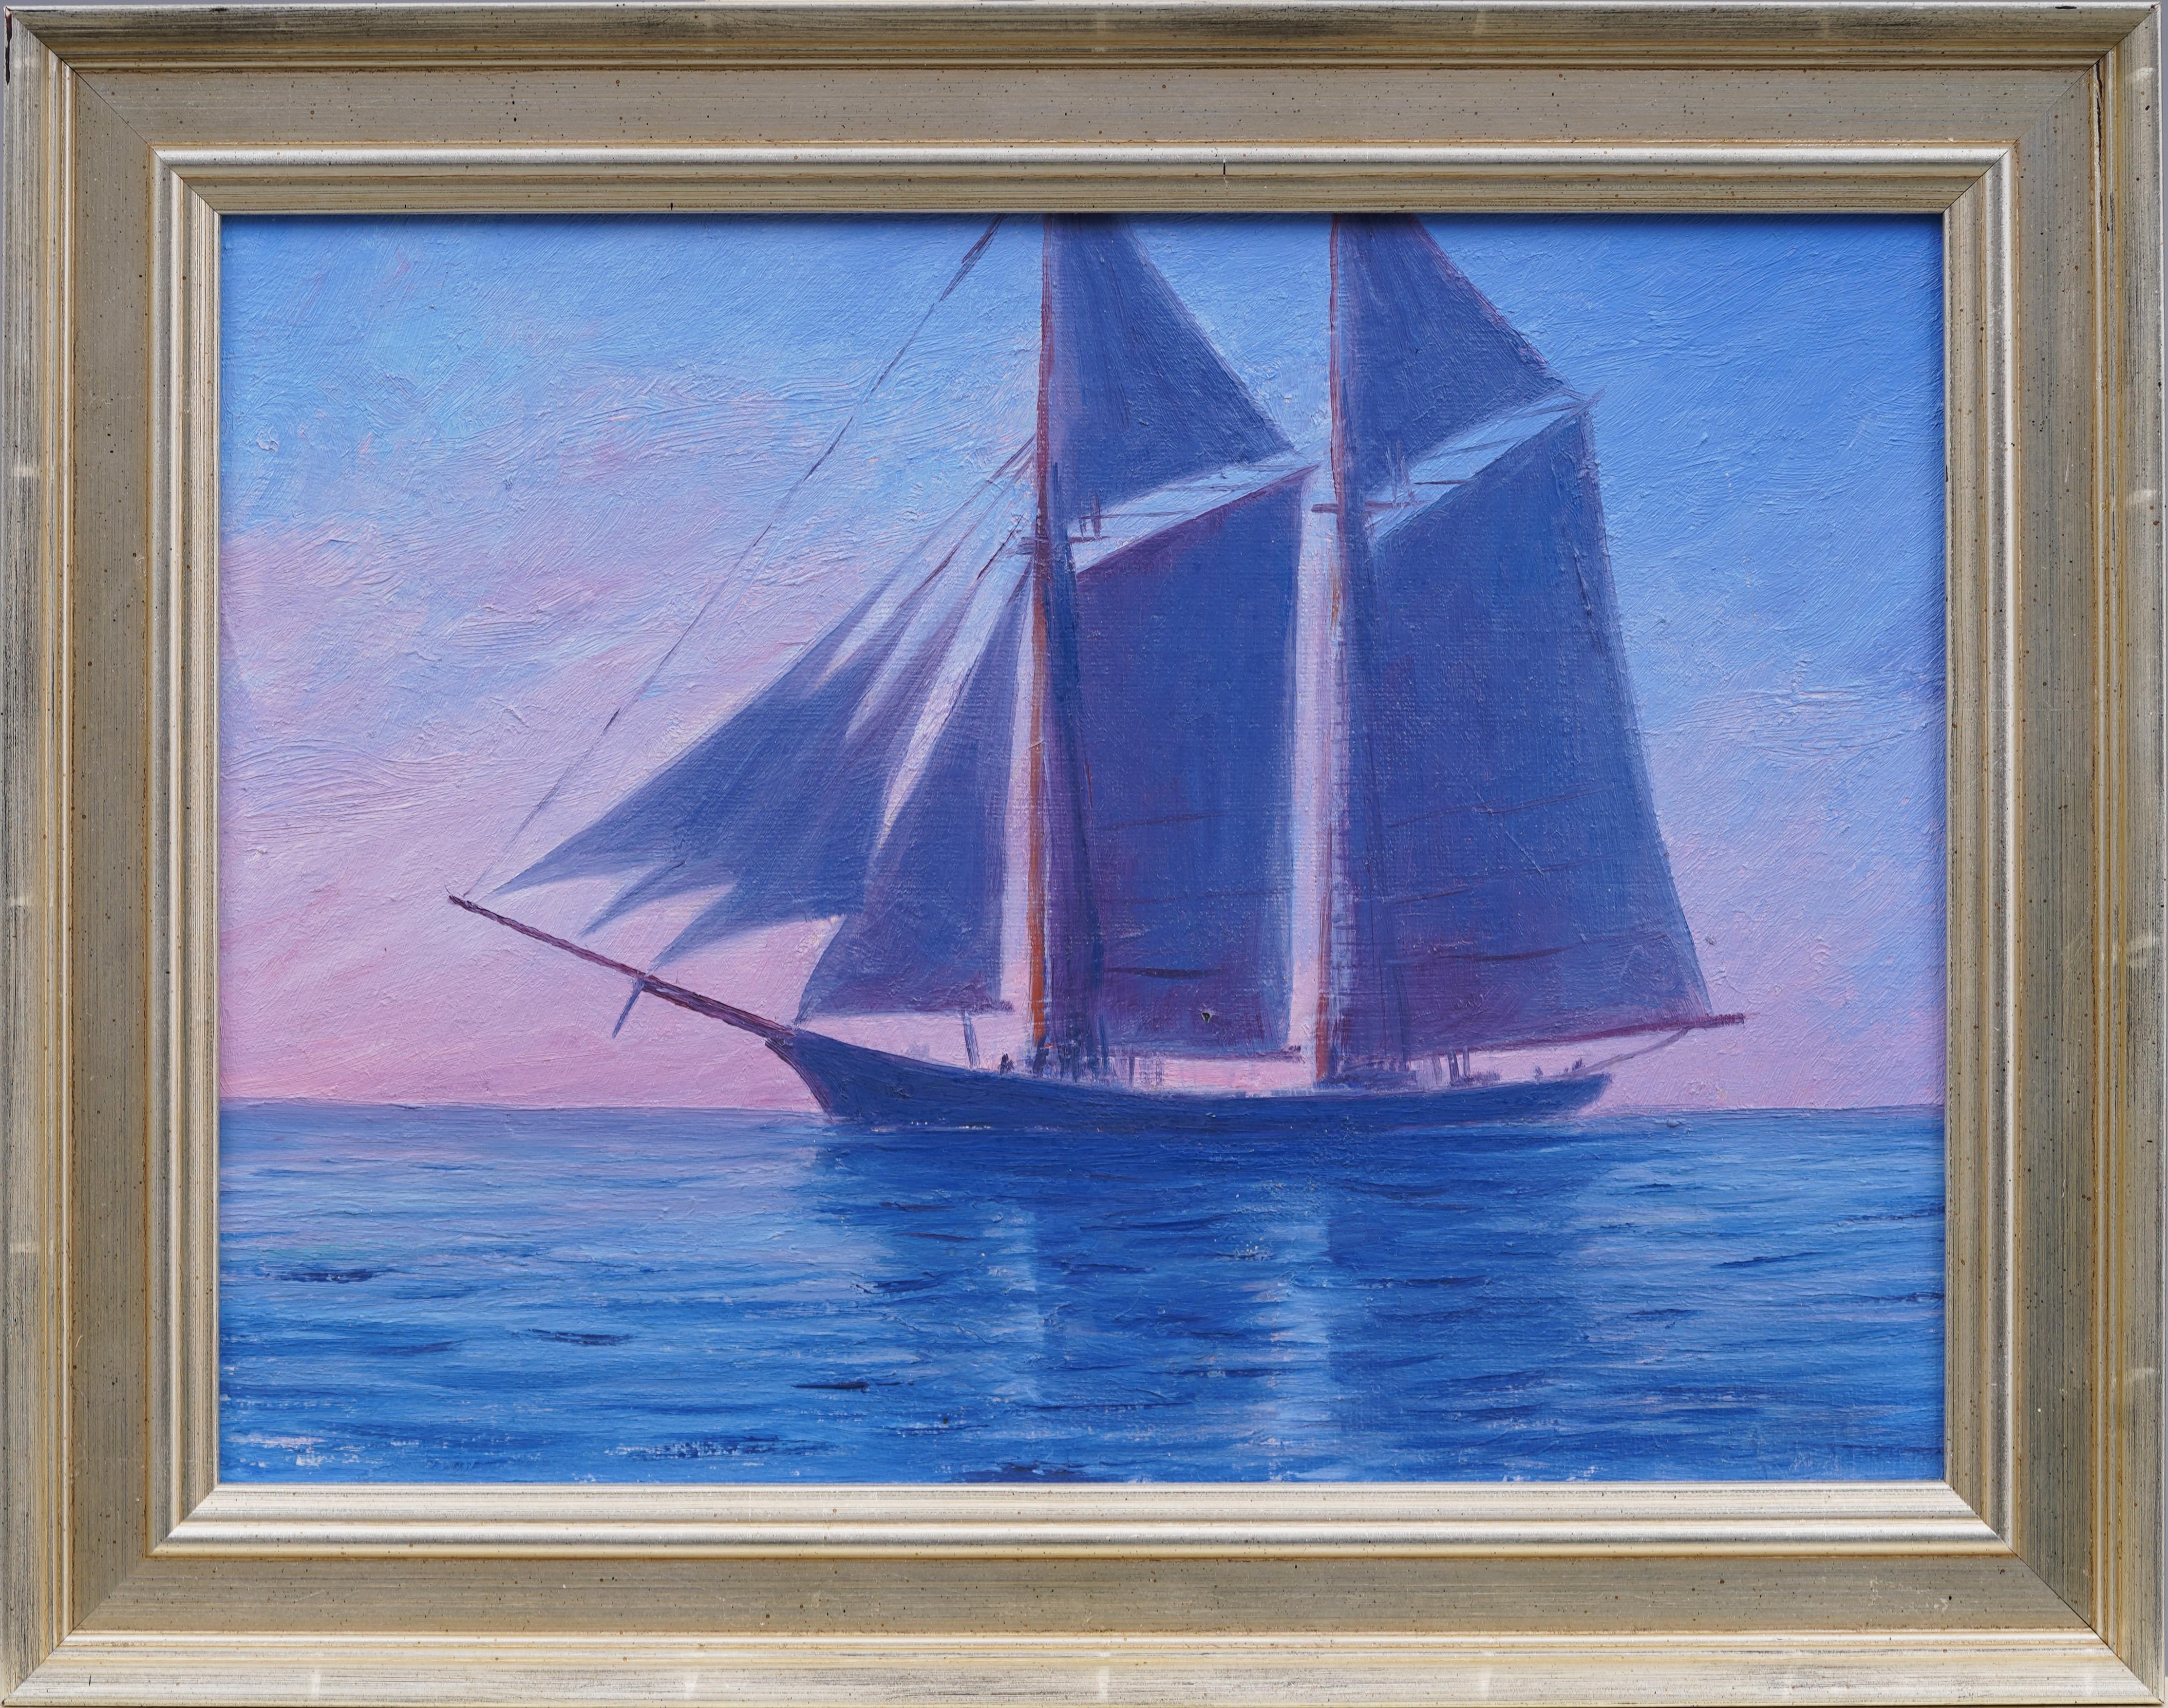 Unknown Landscape Painting - Antique Sunset Sailboat Framed Seascape Signed Silver Frame Oil Painting